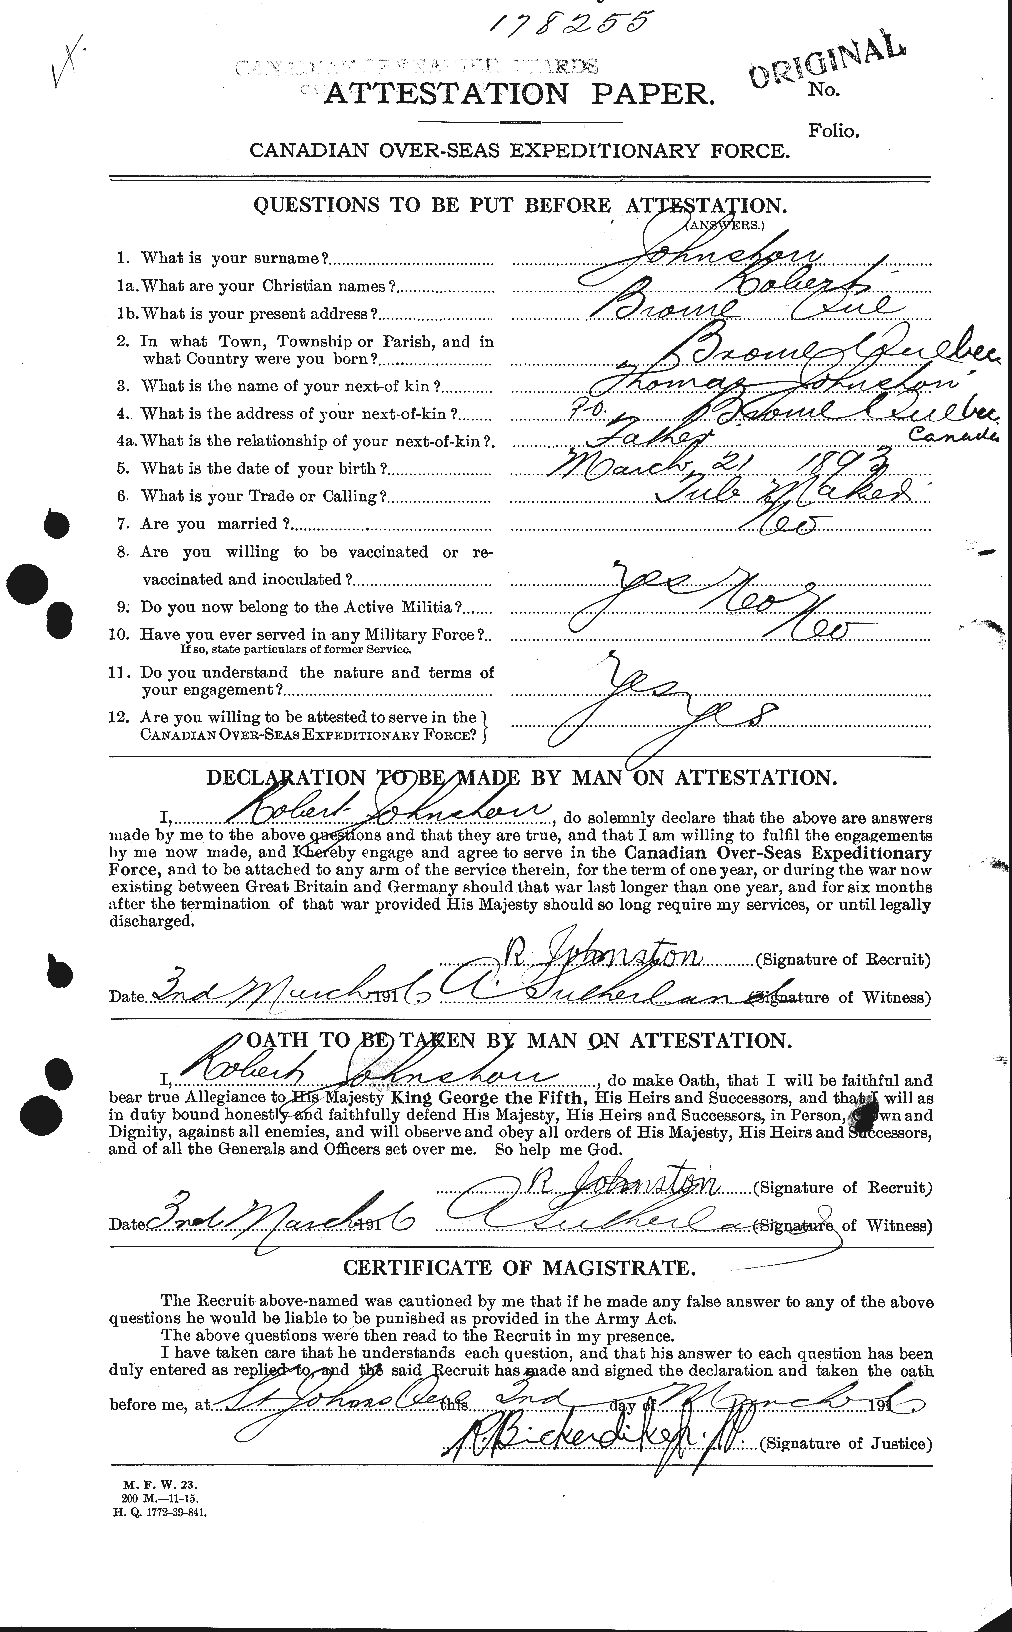 Personnel Records of the First World War - CEF 426988a